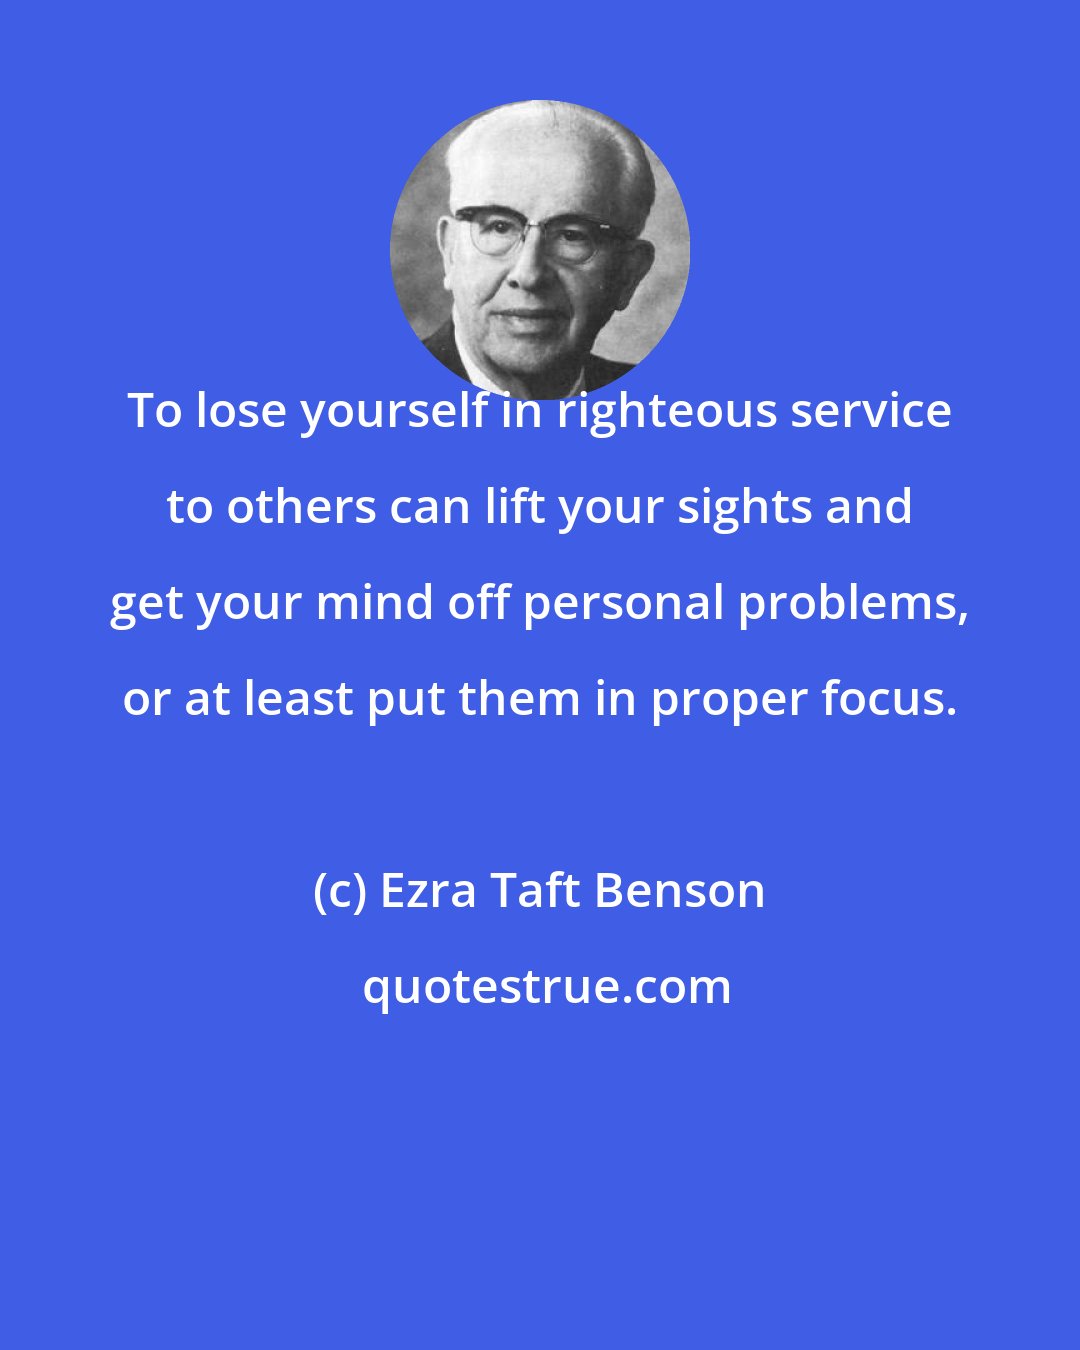 Ezra Taft Benson: To lose yourself in righteous service to others can lift your sights and get your mind off personal problems, or at least put them in proper focus.